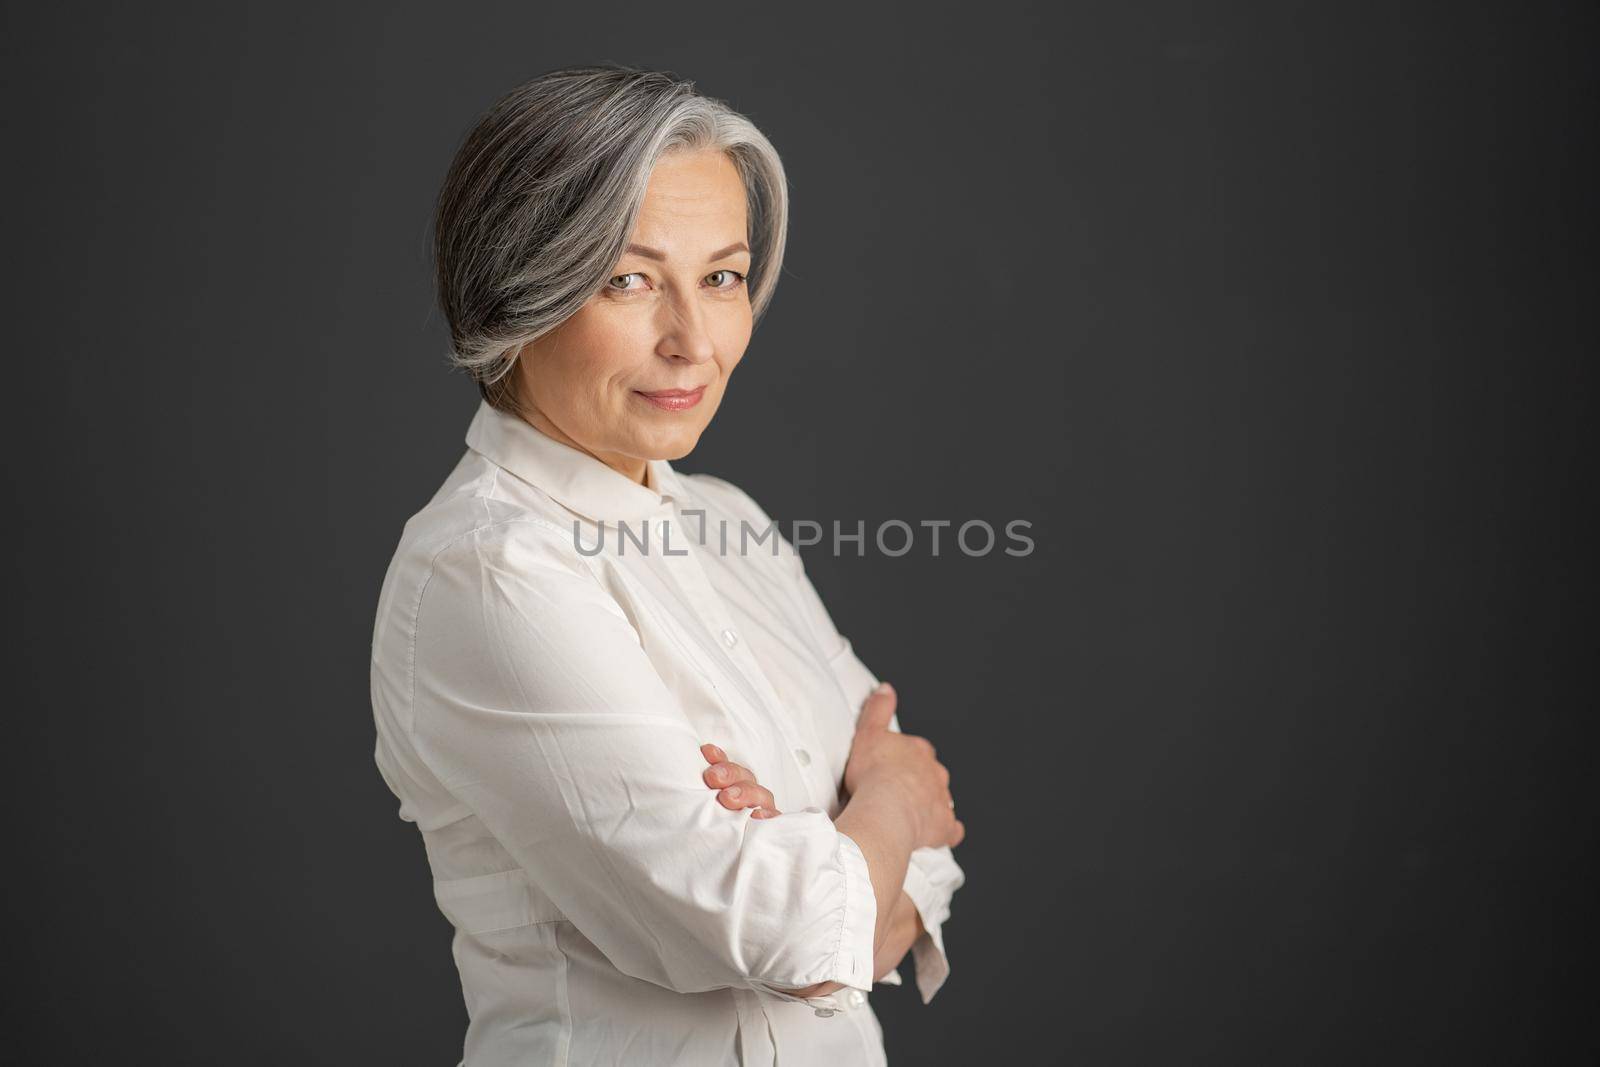 Pretty white-haired woman smiles looking at camera with arms crossed. Stylish caucasian businesswoman isolated on dark gray background. Textspace at right side. Business concept.